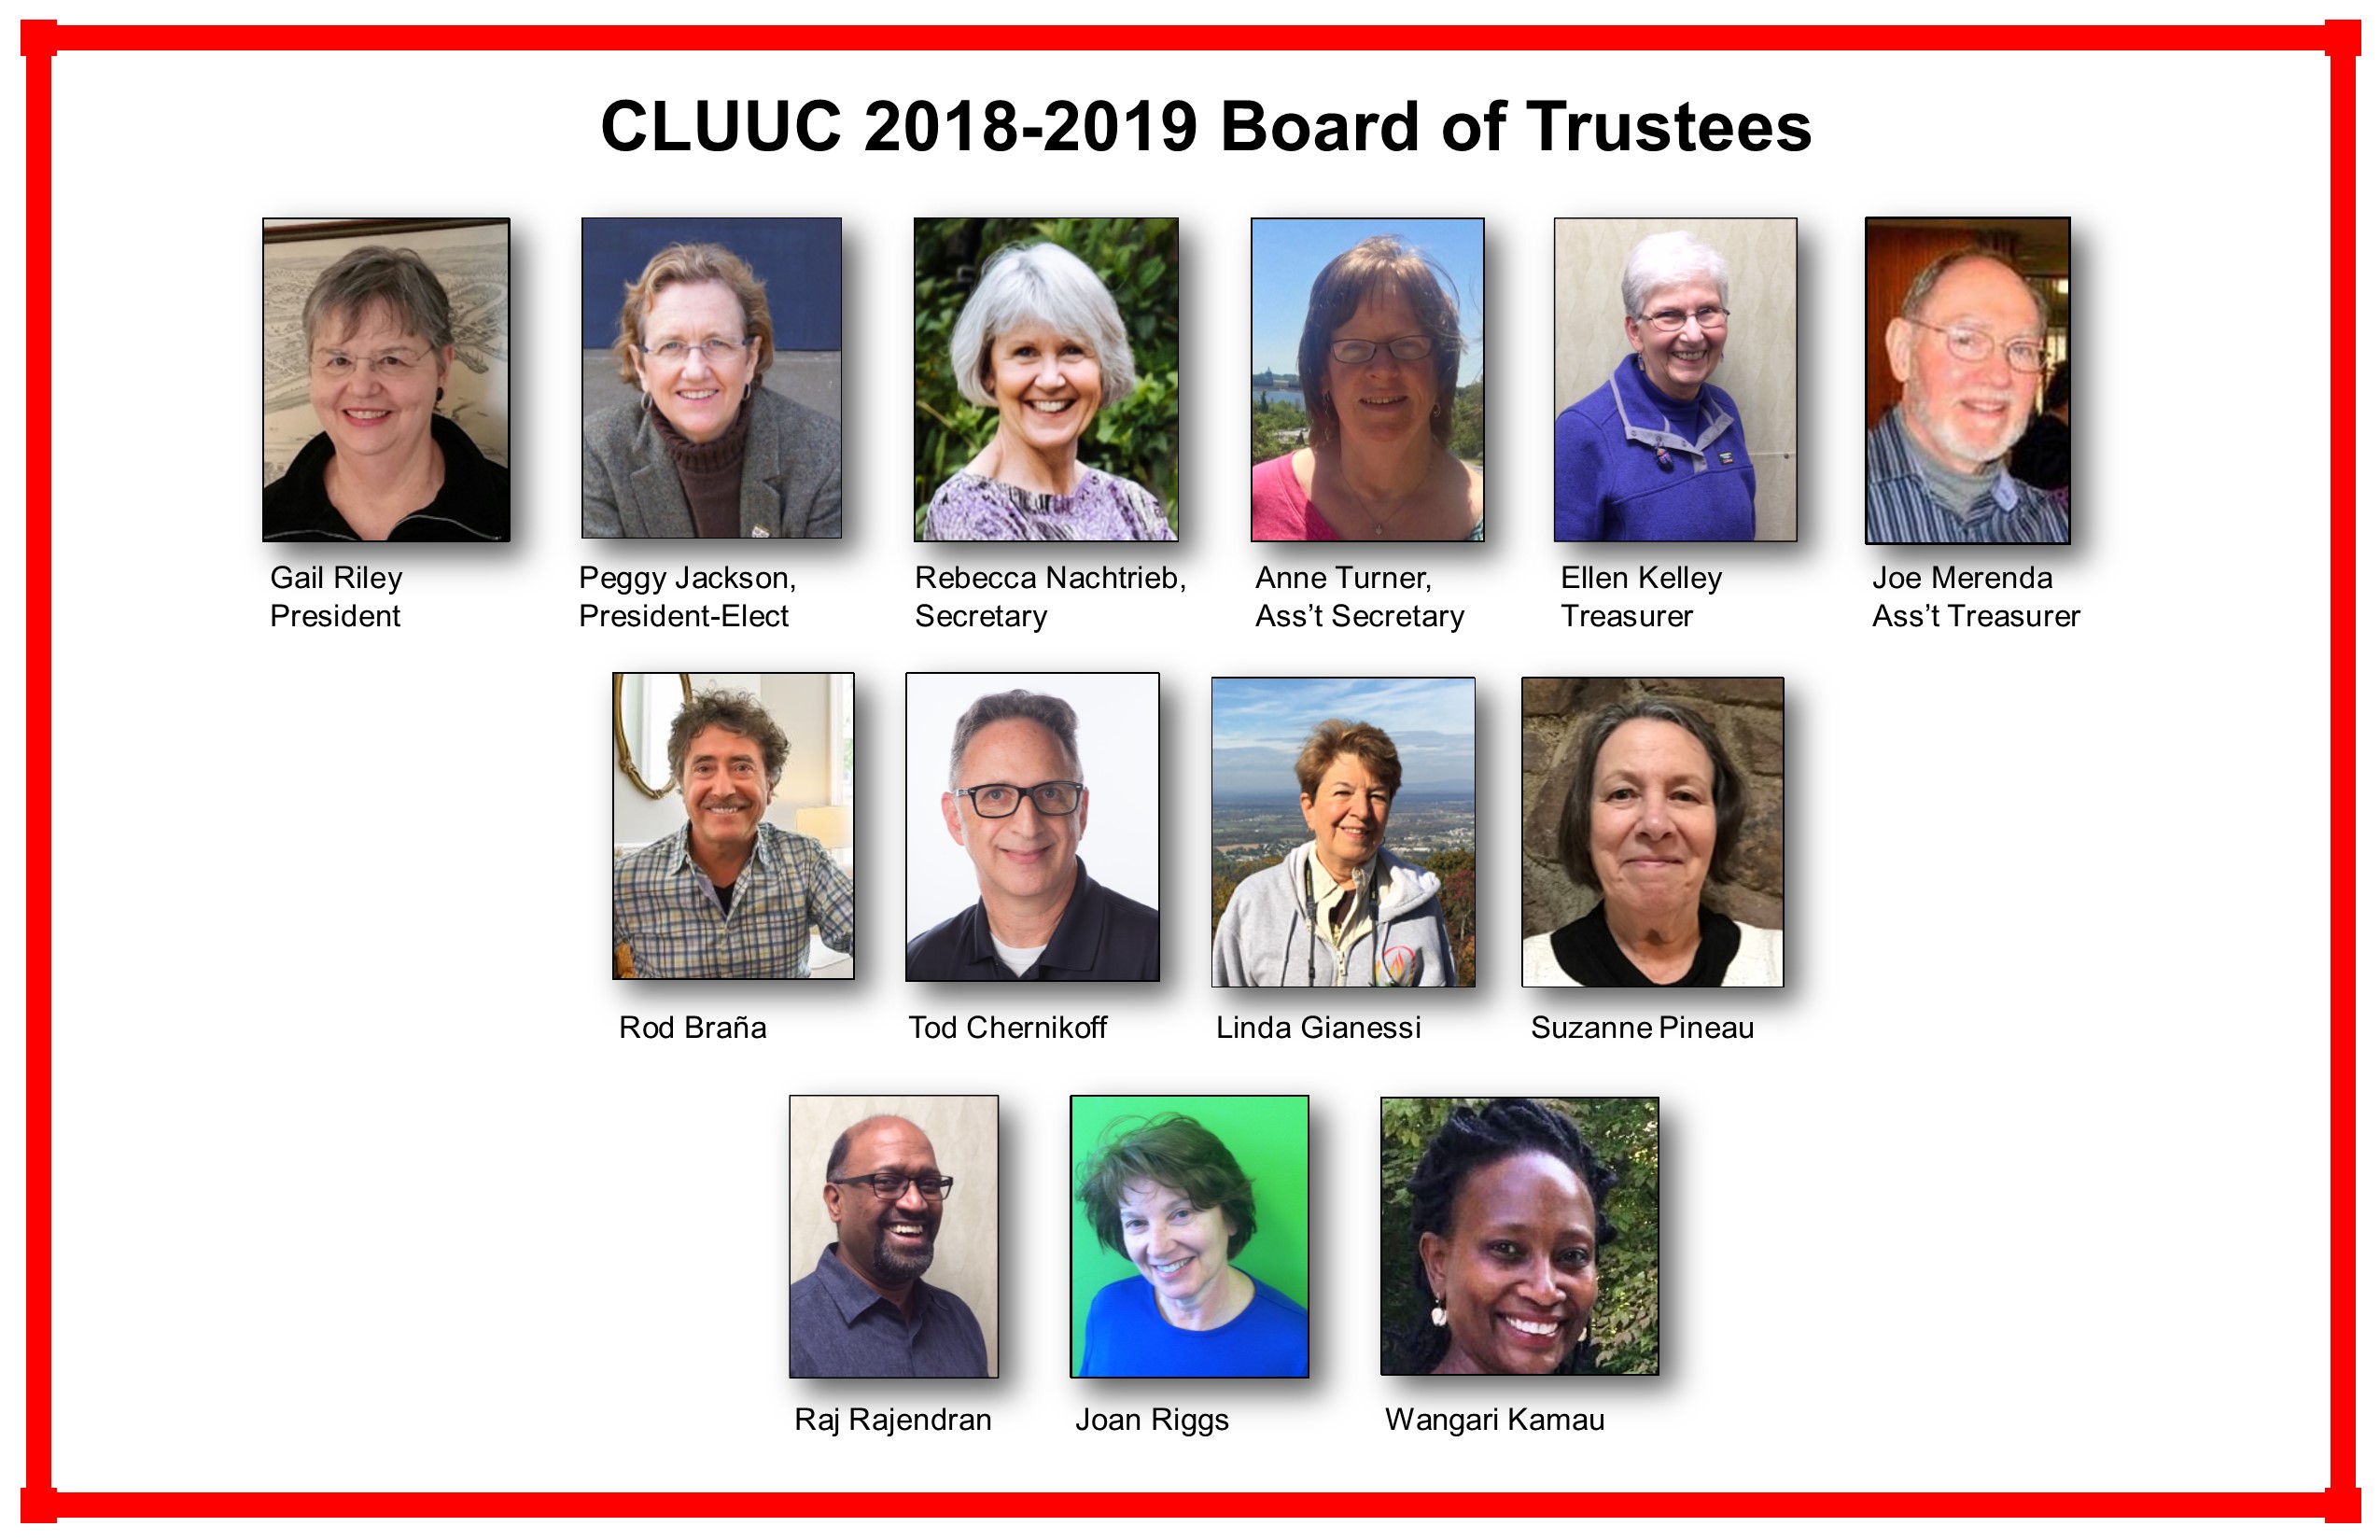 updated board of trustees headshots and names 2018-19